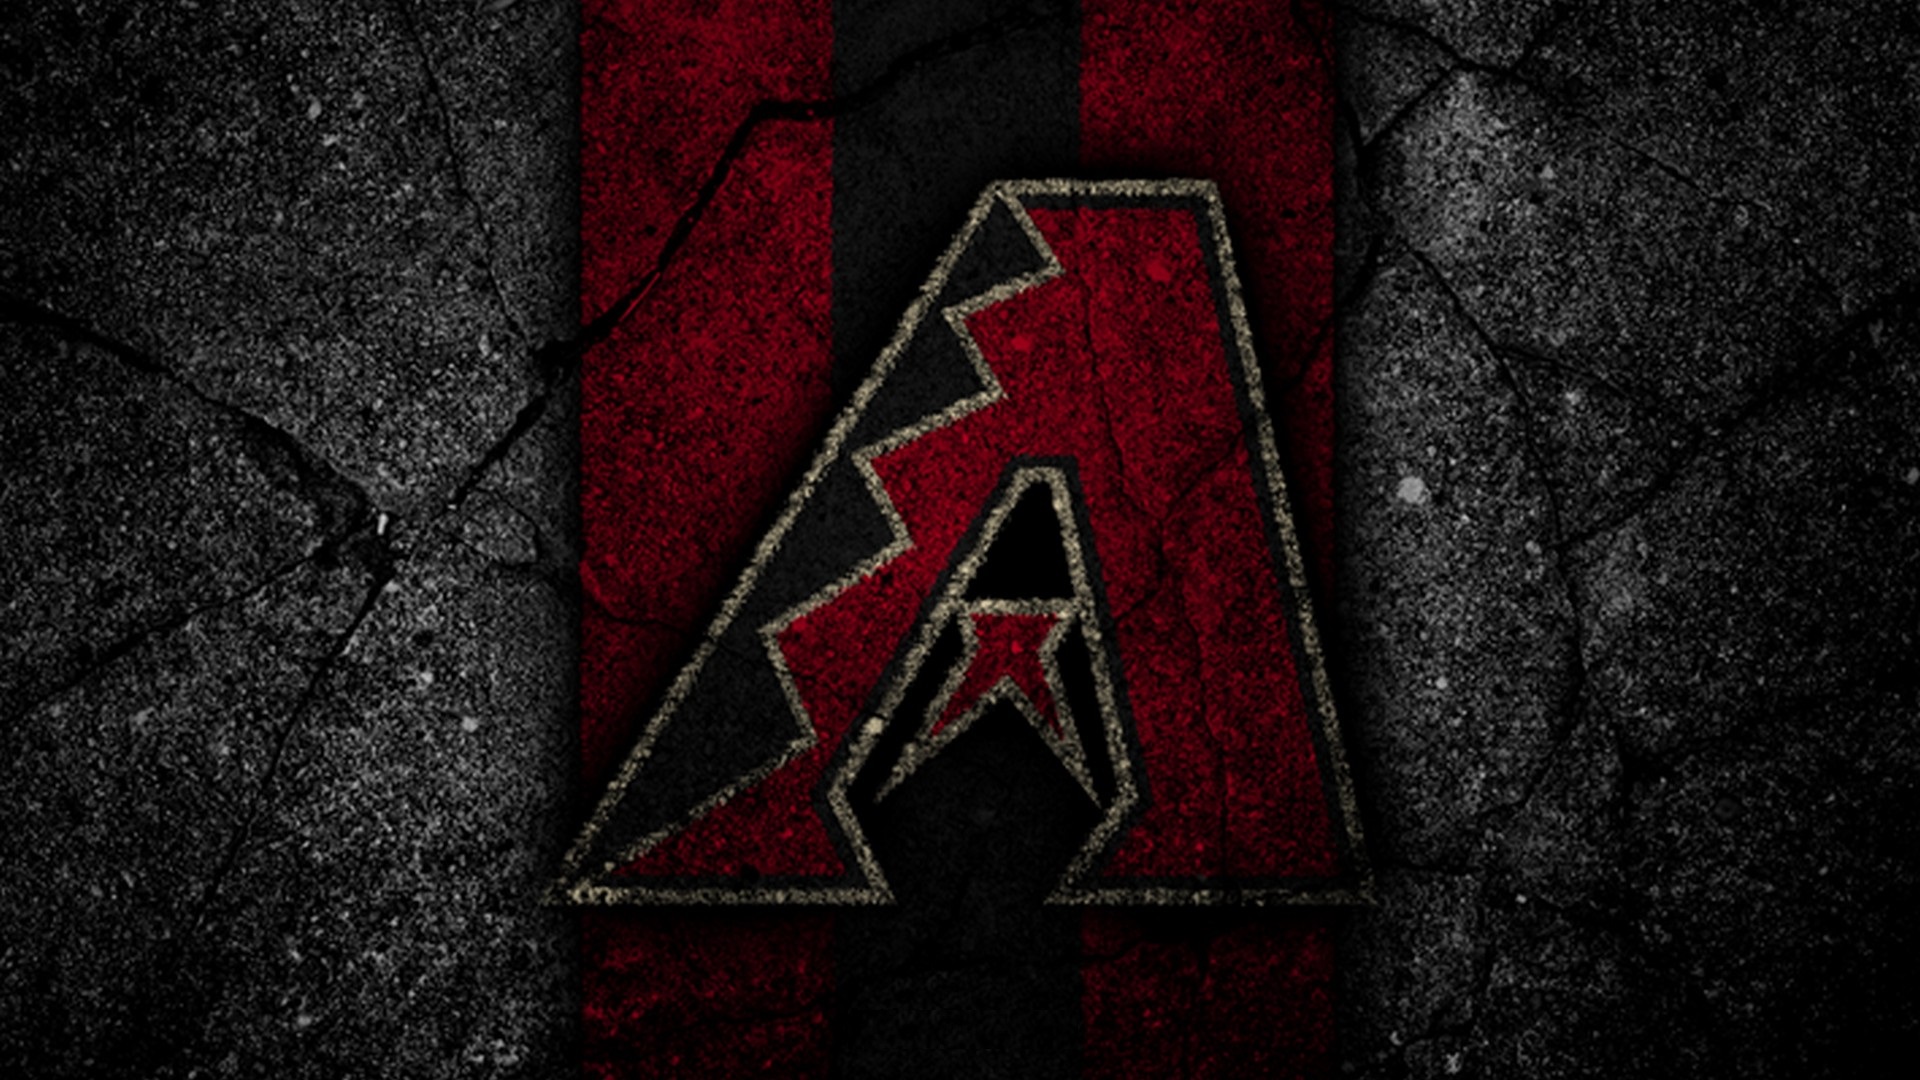 Wallpapers Arizona Diamondbacks MLB With high-resolution 1920X1080 pixel. You can use this wallpaper for Mac Desktop Wallpaper, Laptop Screensavers, Android Wallpapers, Tablet or iPhone Home Screen and another mobile phone device